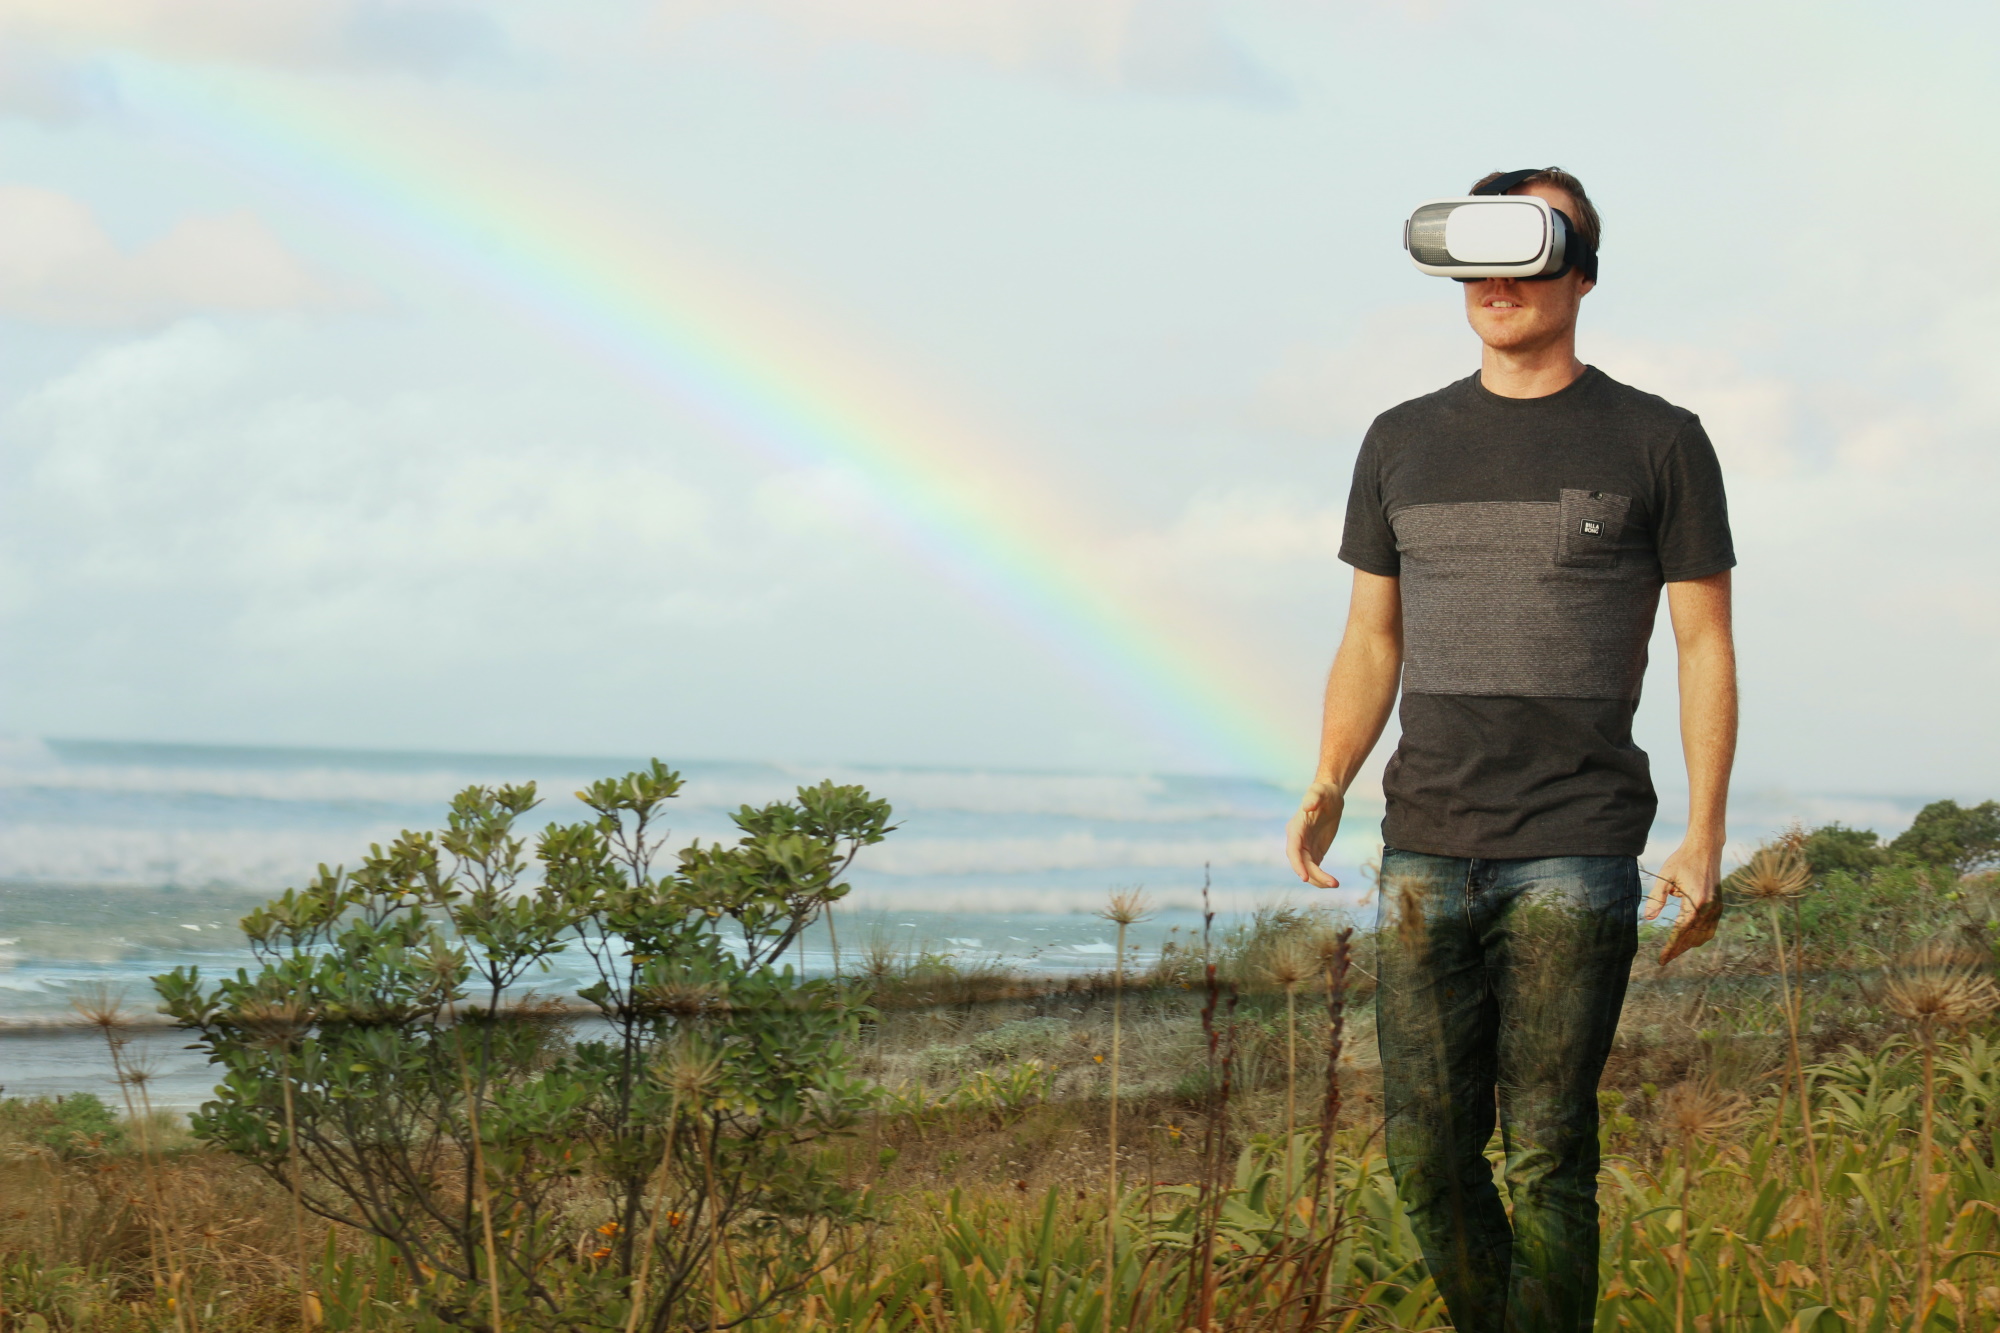 male wondering outside wearing VR headset with rainbow in background